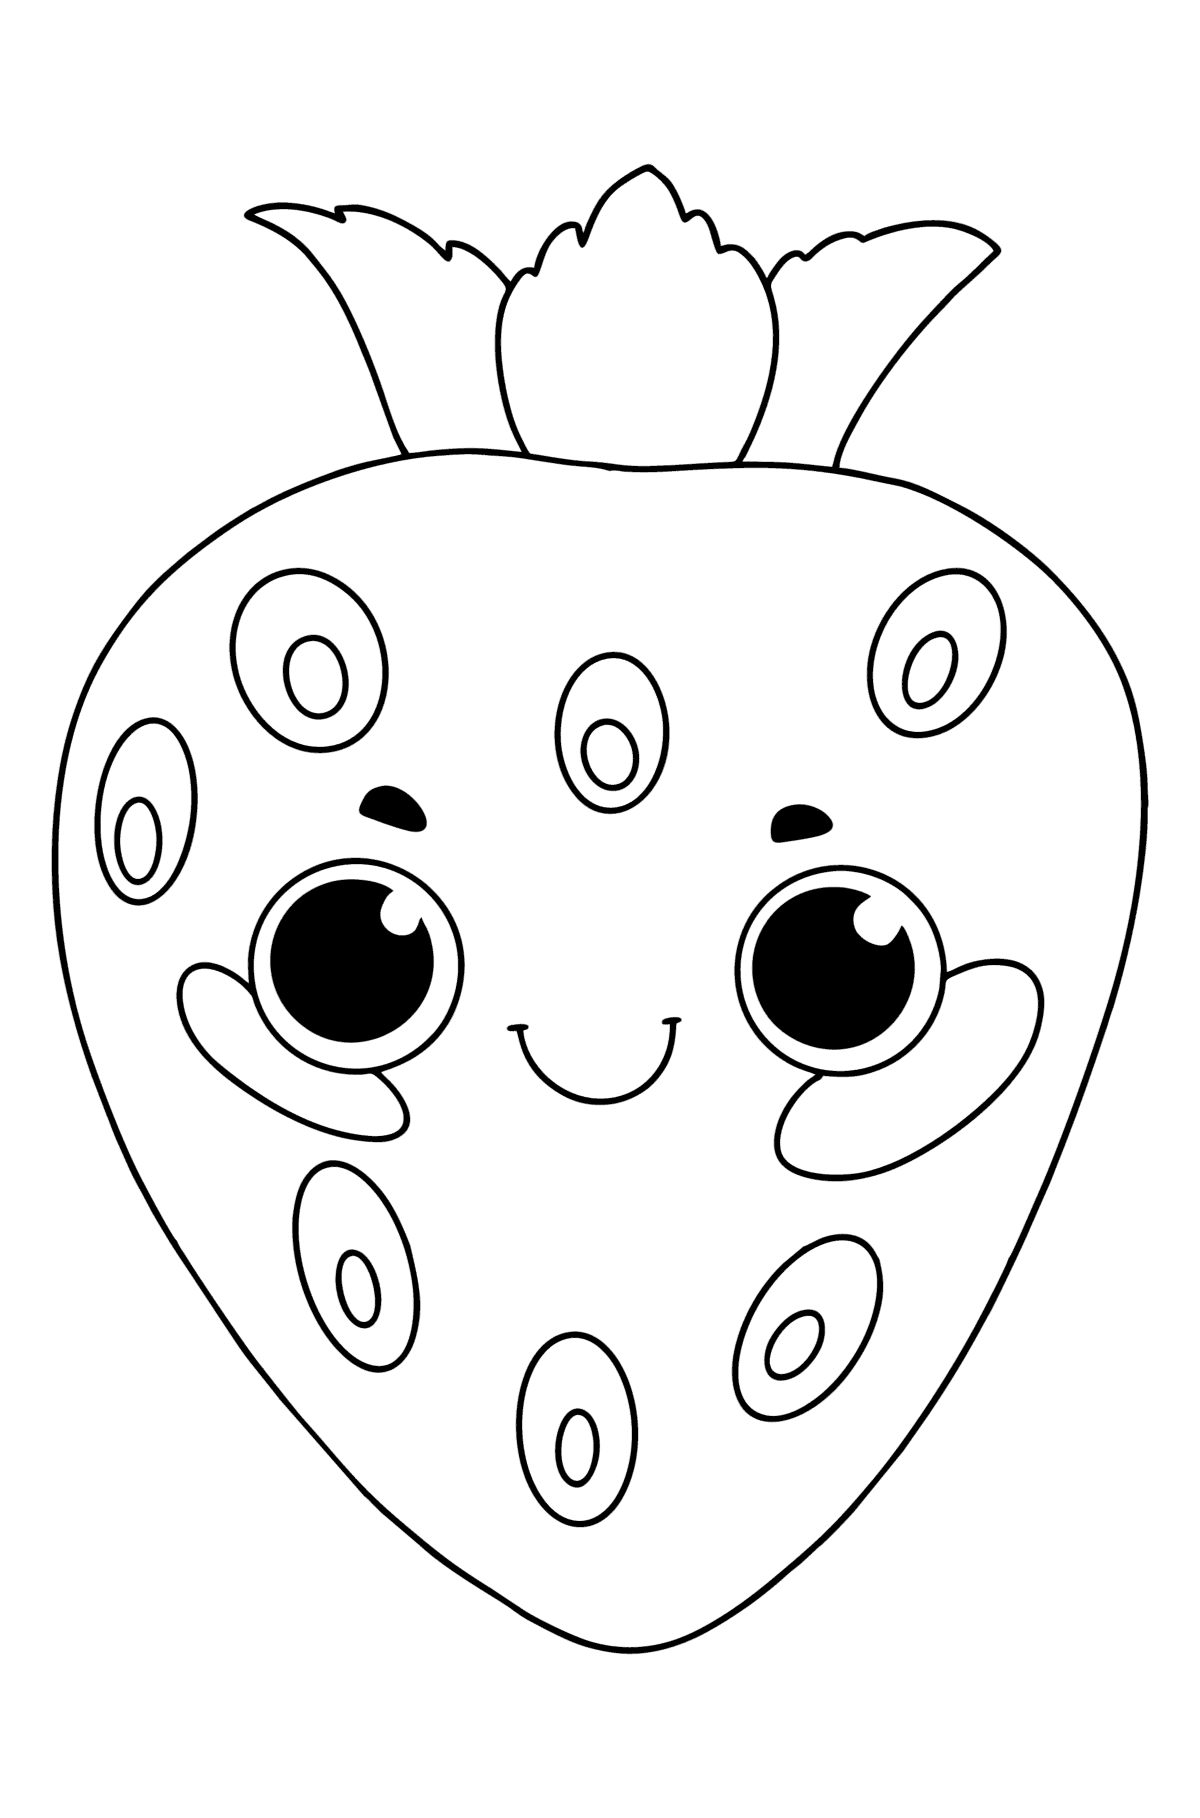 Cute strawberry сoloring page - Coloring Pages for Kids